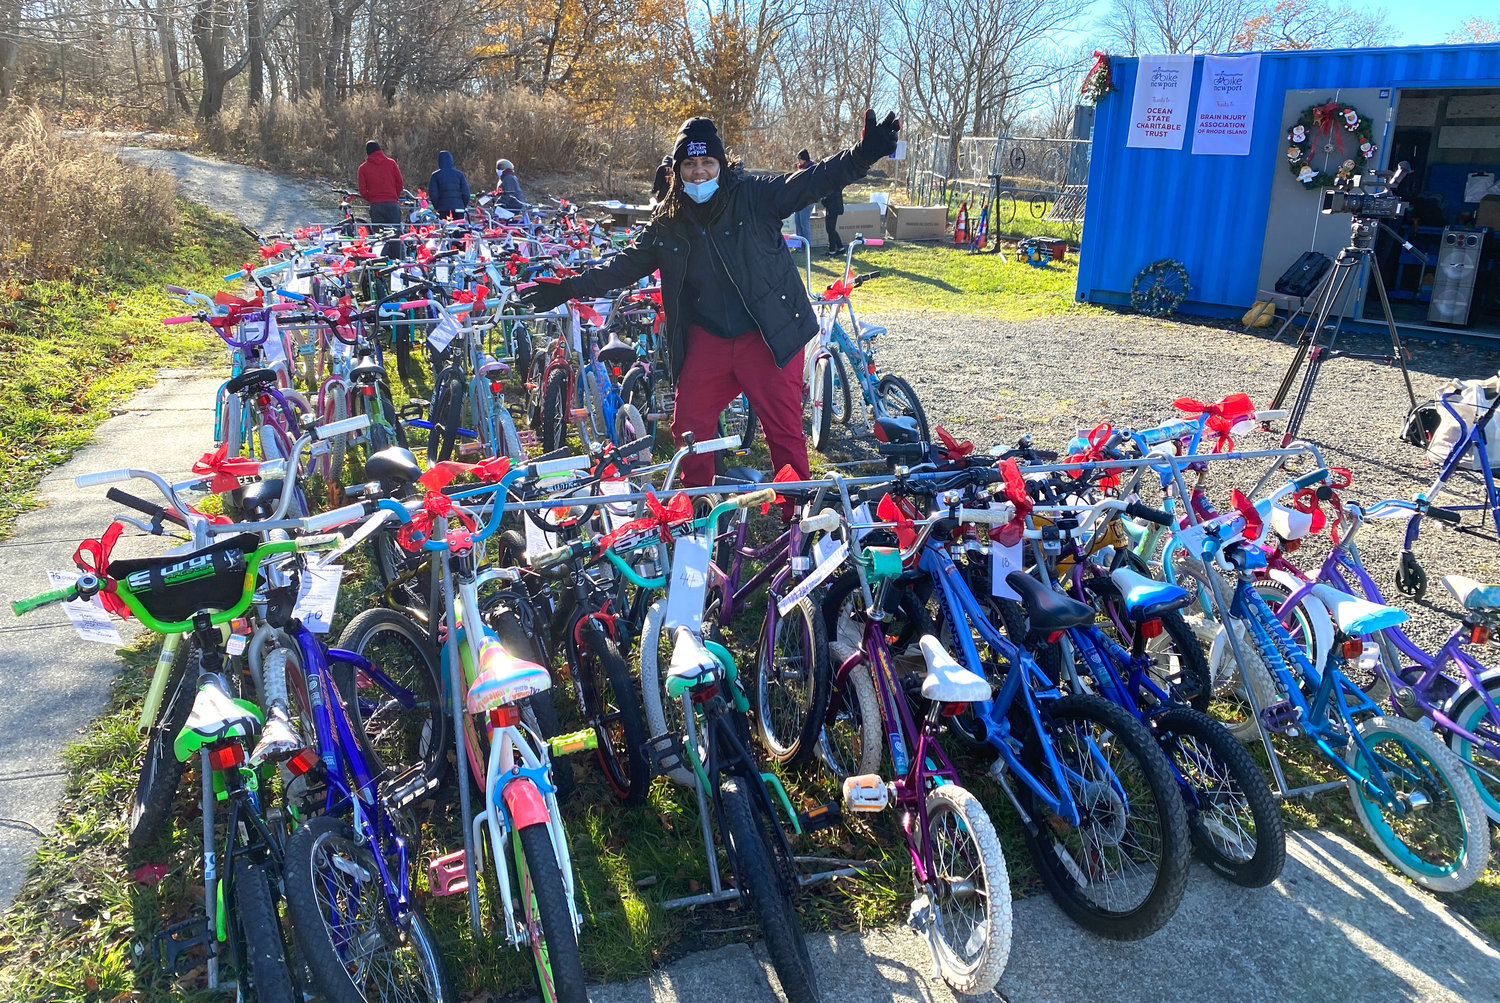 100 bikes ready for new homes at the Annual Holiday Bike Giveaway at the barn